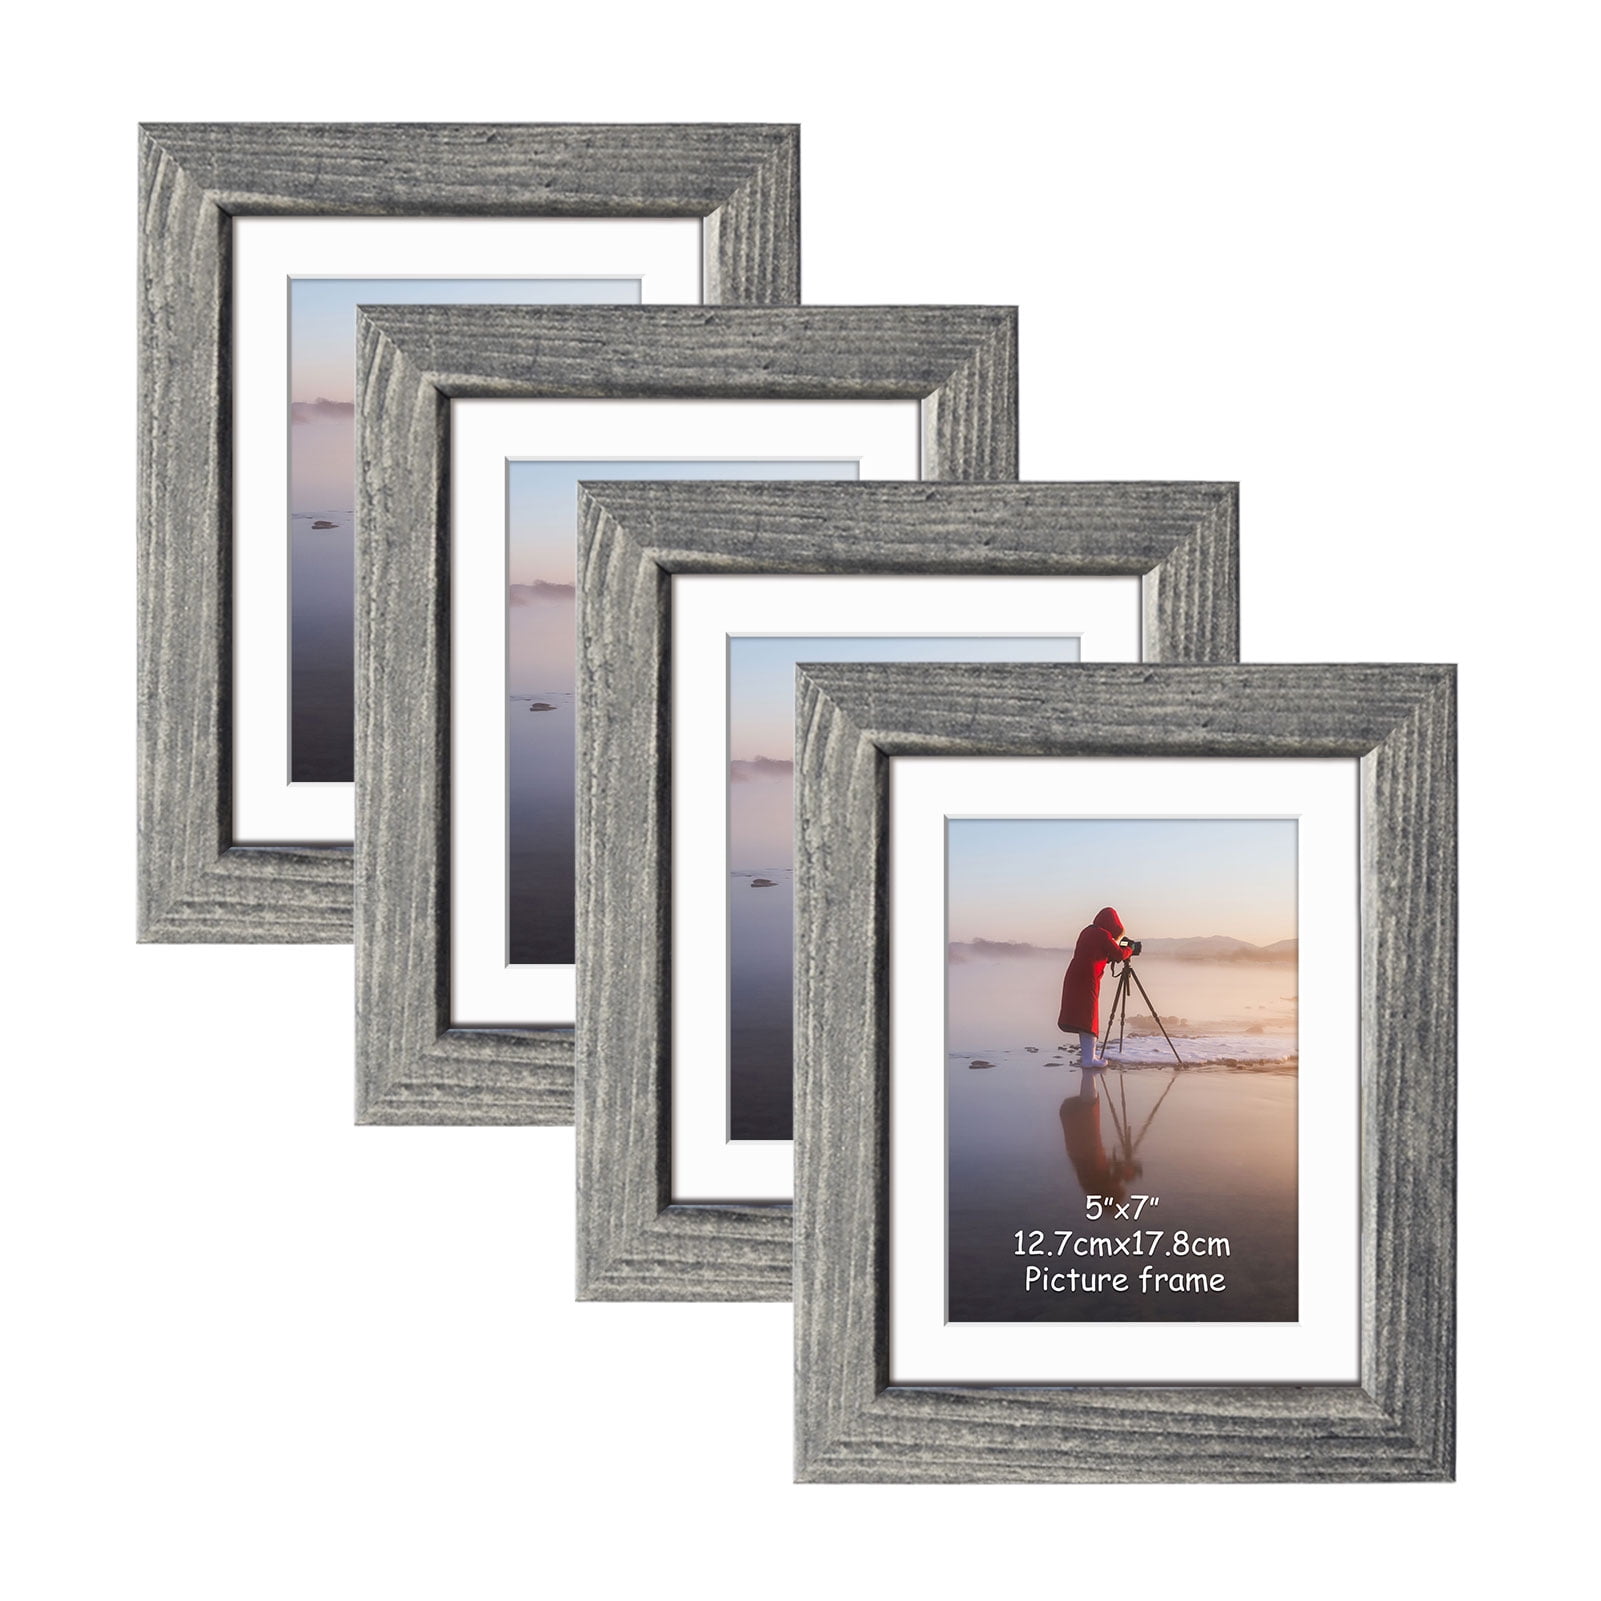 Set of 3 11x17" Format Picture Frame Wall Art Black Poster Vertical Horizontal 